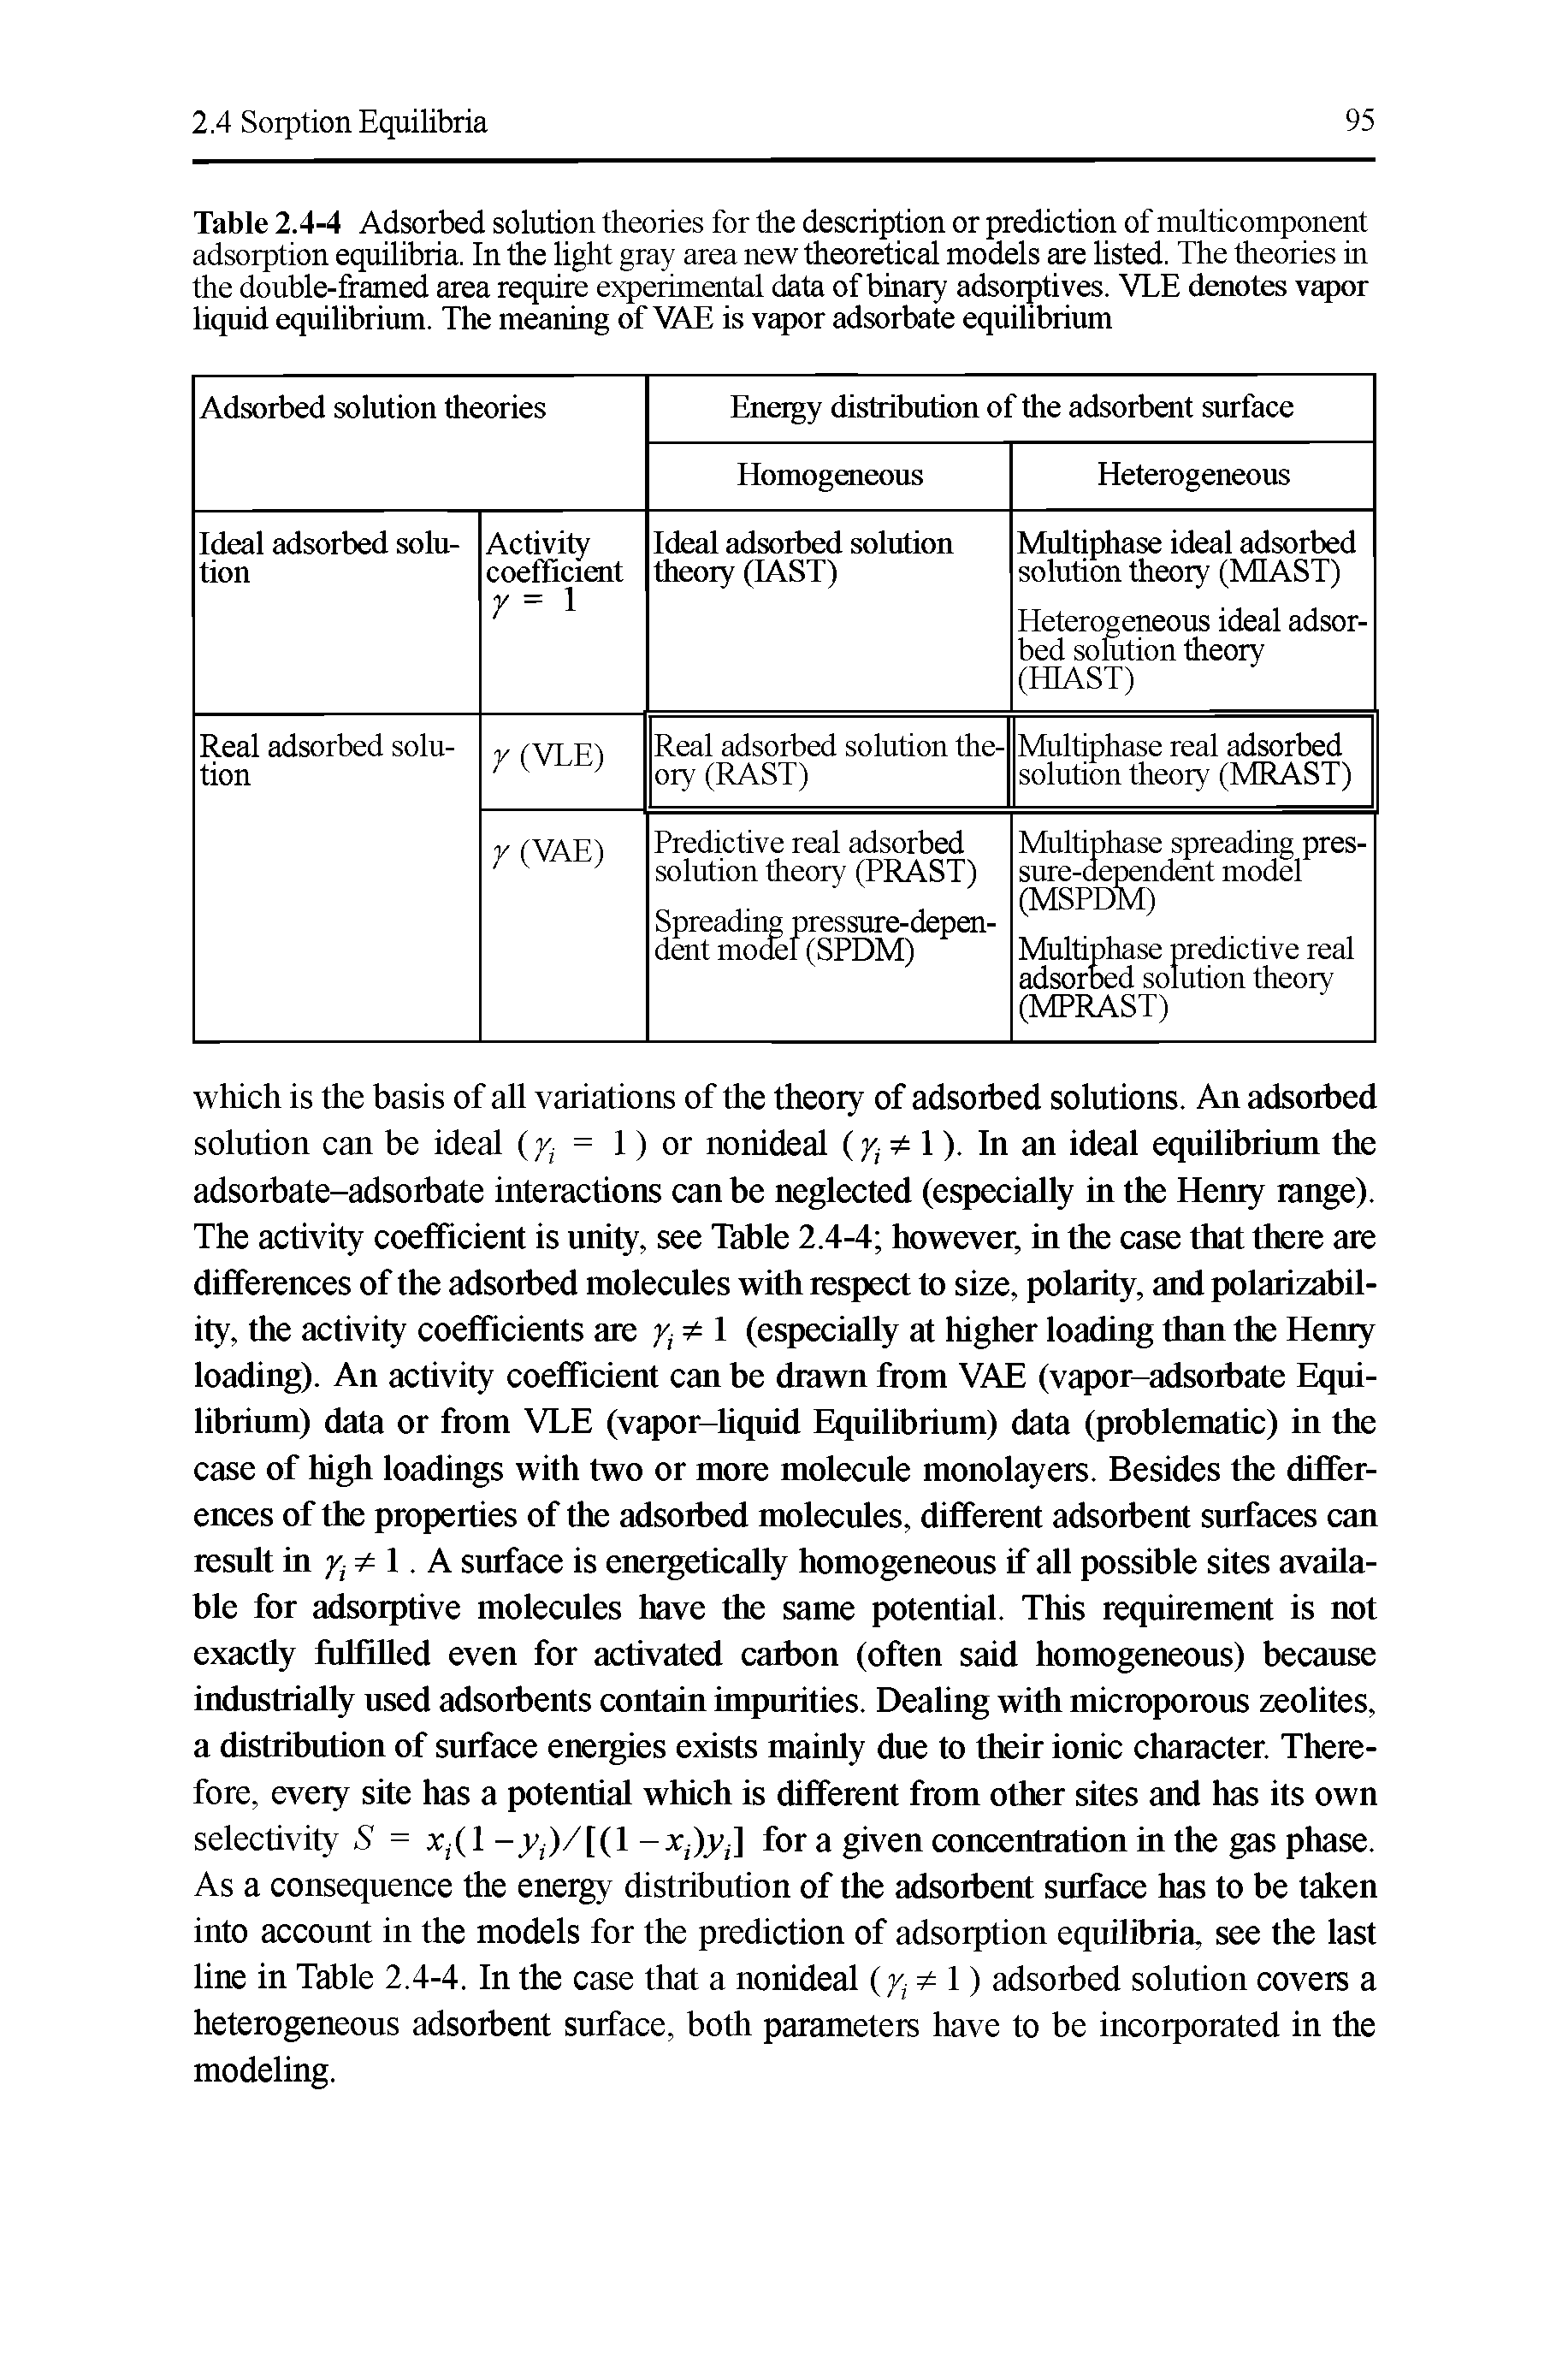 Table 2.4-4 Adsorbed solution theories for the description or prediction of multicomponent adsorption equilibria. In the light gray area new theoretical models are listed. The theories in the double-framed area require experimental data of binary adsorptives. VLE denotes vapor liquid equilibrium. The meaning of VAE is vapor adsorbate equilibrium...